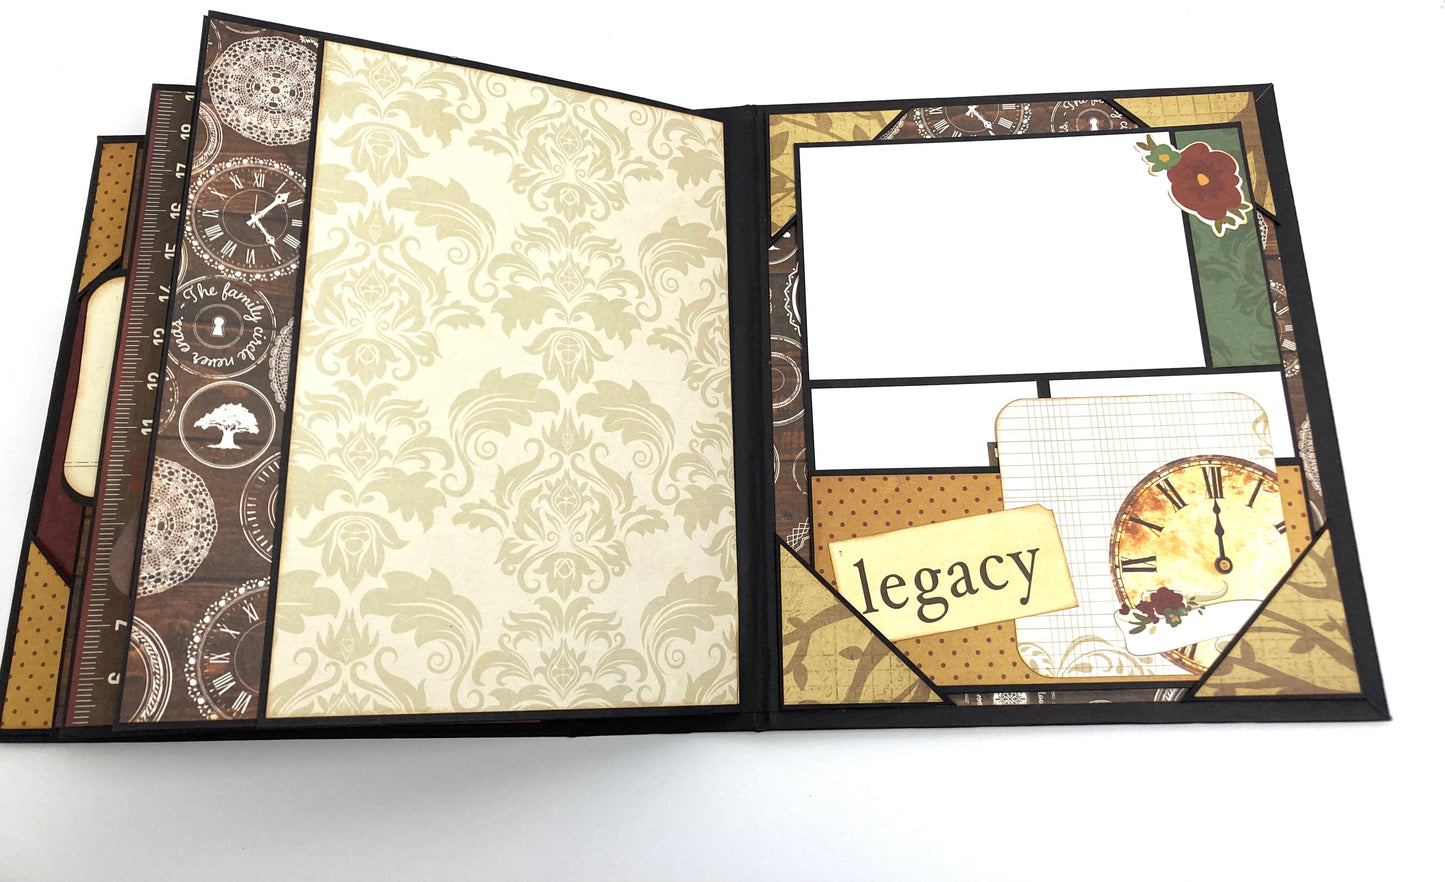 Family Tree Photo Mini Album - Customizable Heritage Scrapbook with Your Name on the Cover